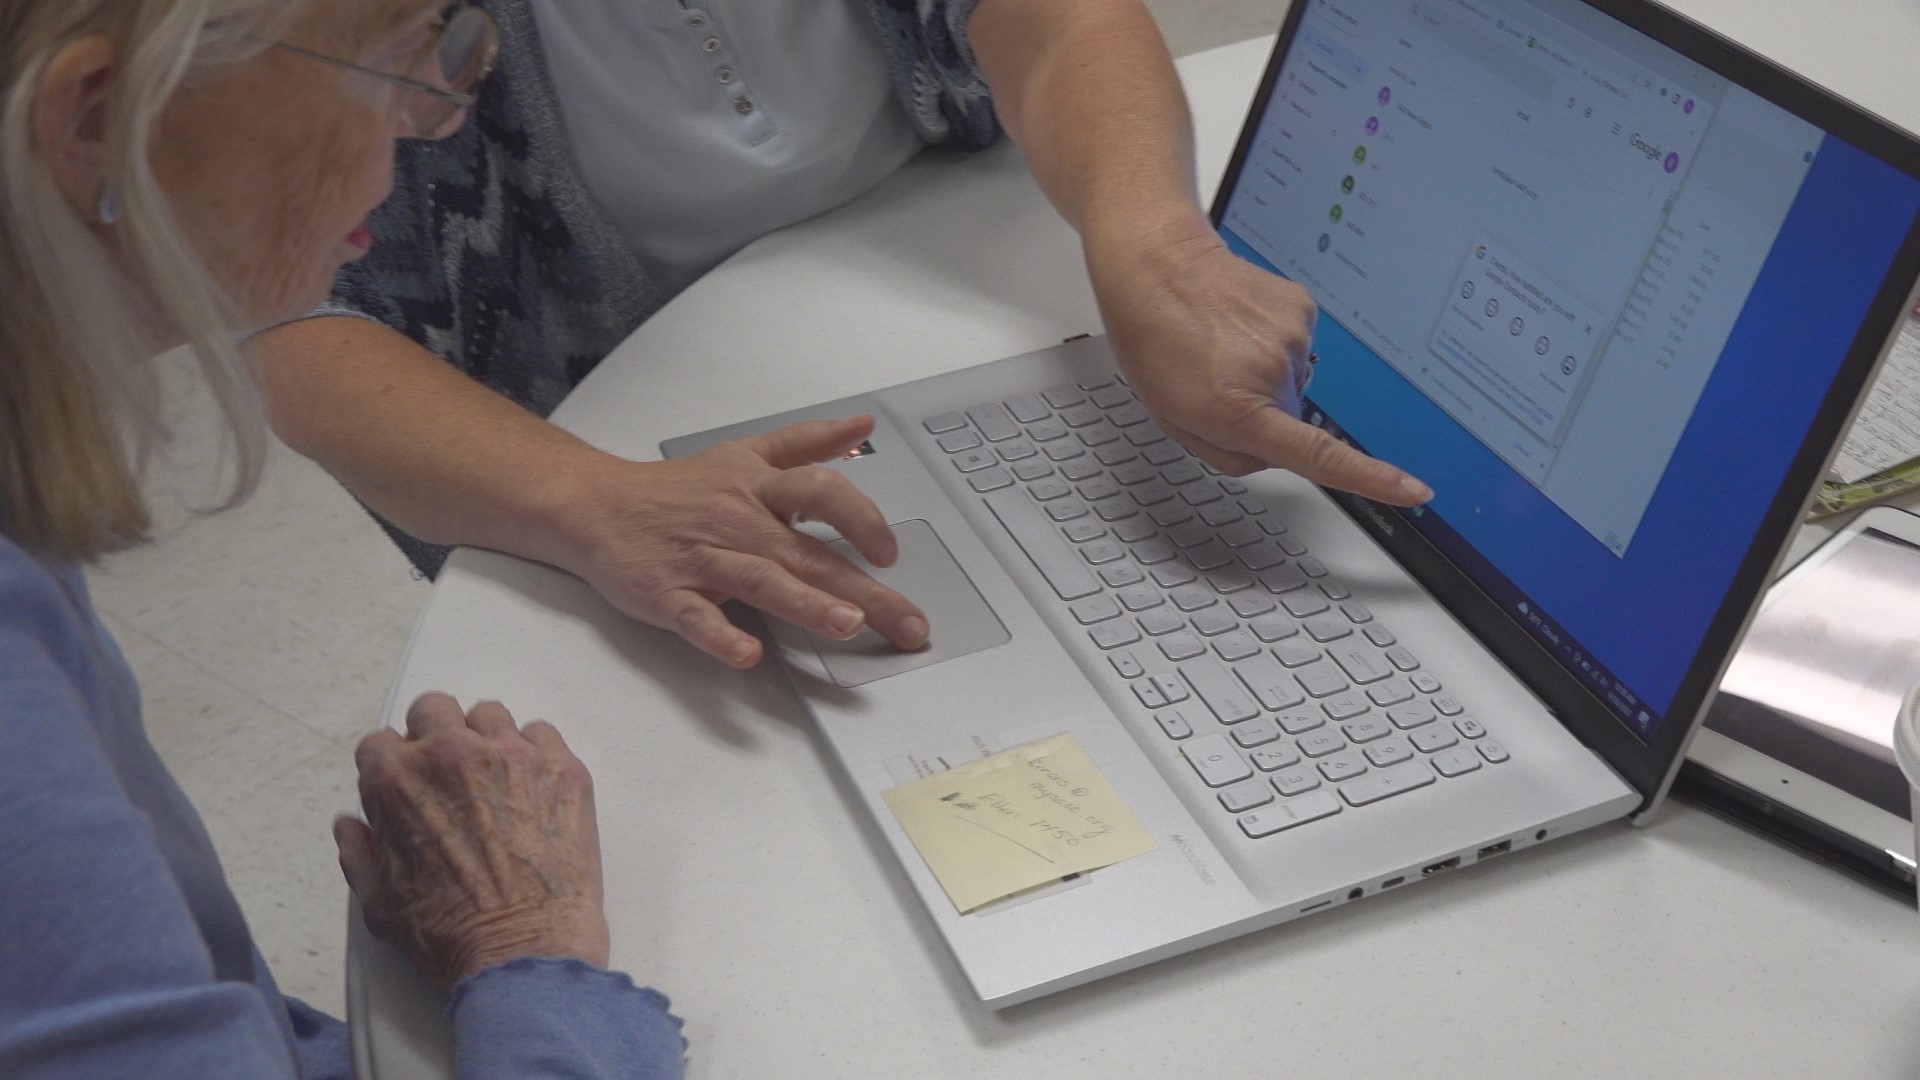 The event is sponsored by the Area Agency on Aging, which is also providing a limited number of free tablets for participants to take home with them.